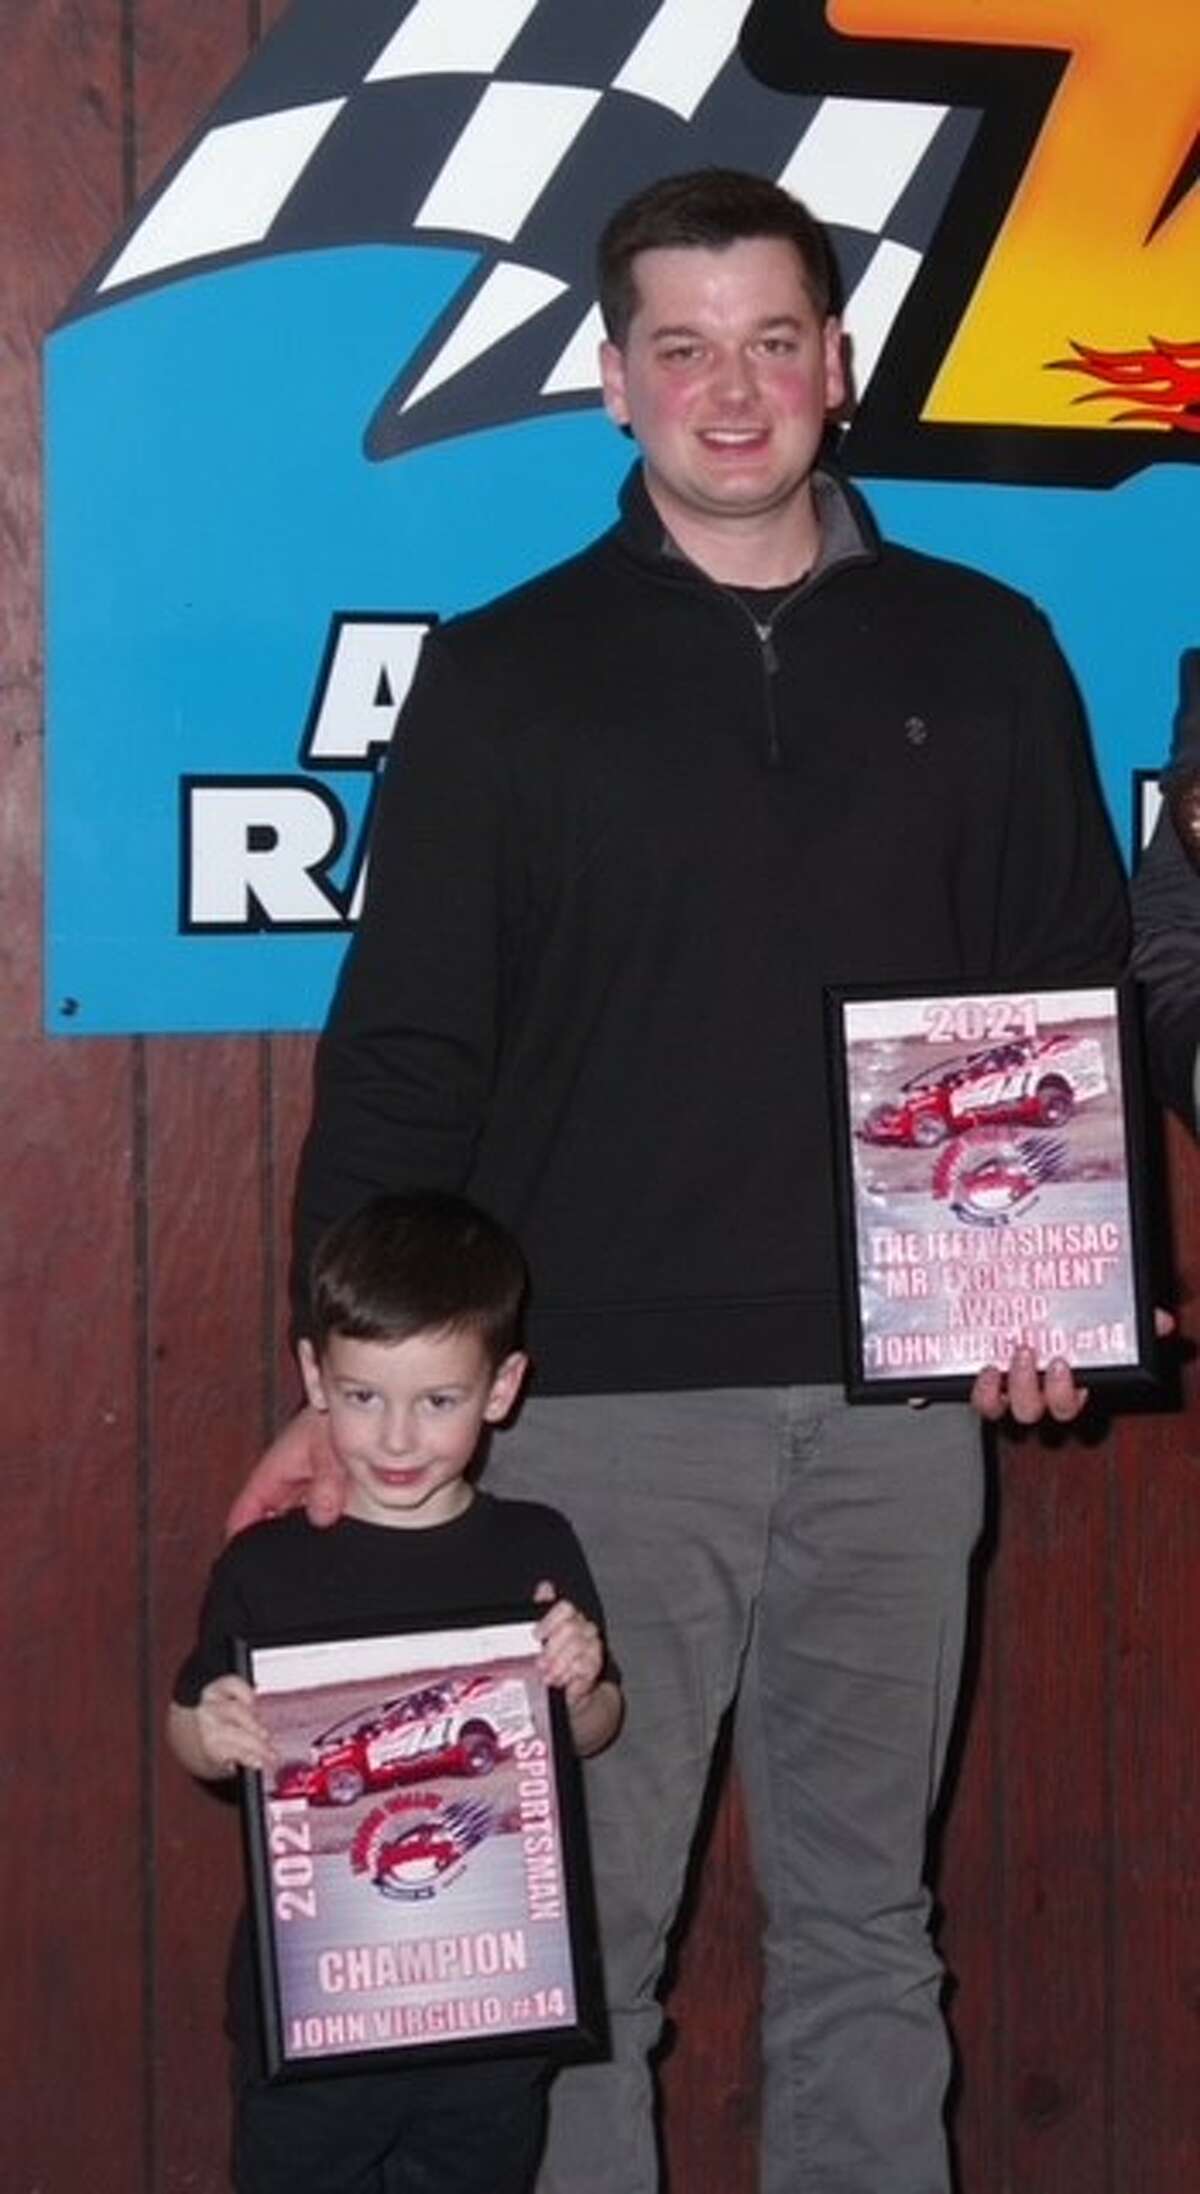 Sportsman driver John Virgilio accepts the ‘Jeff Yasinsac Mr. Excitement Award’ for his exciting driving style in March at the Valleys Awards banquet.